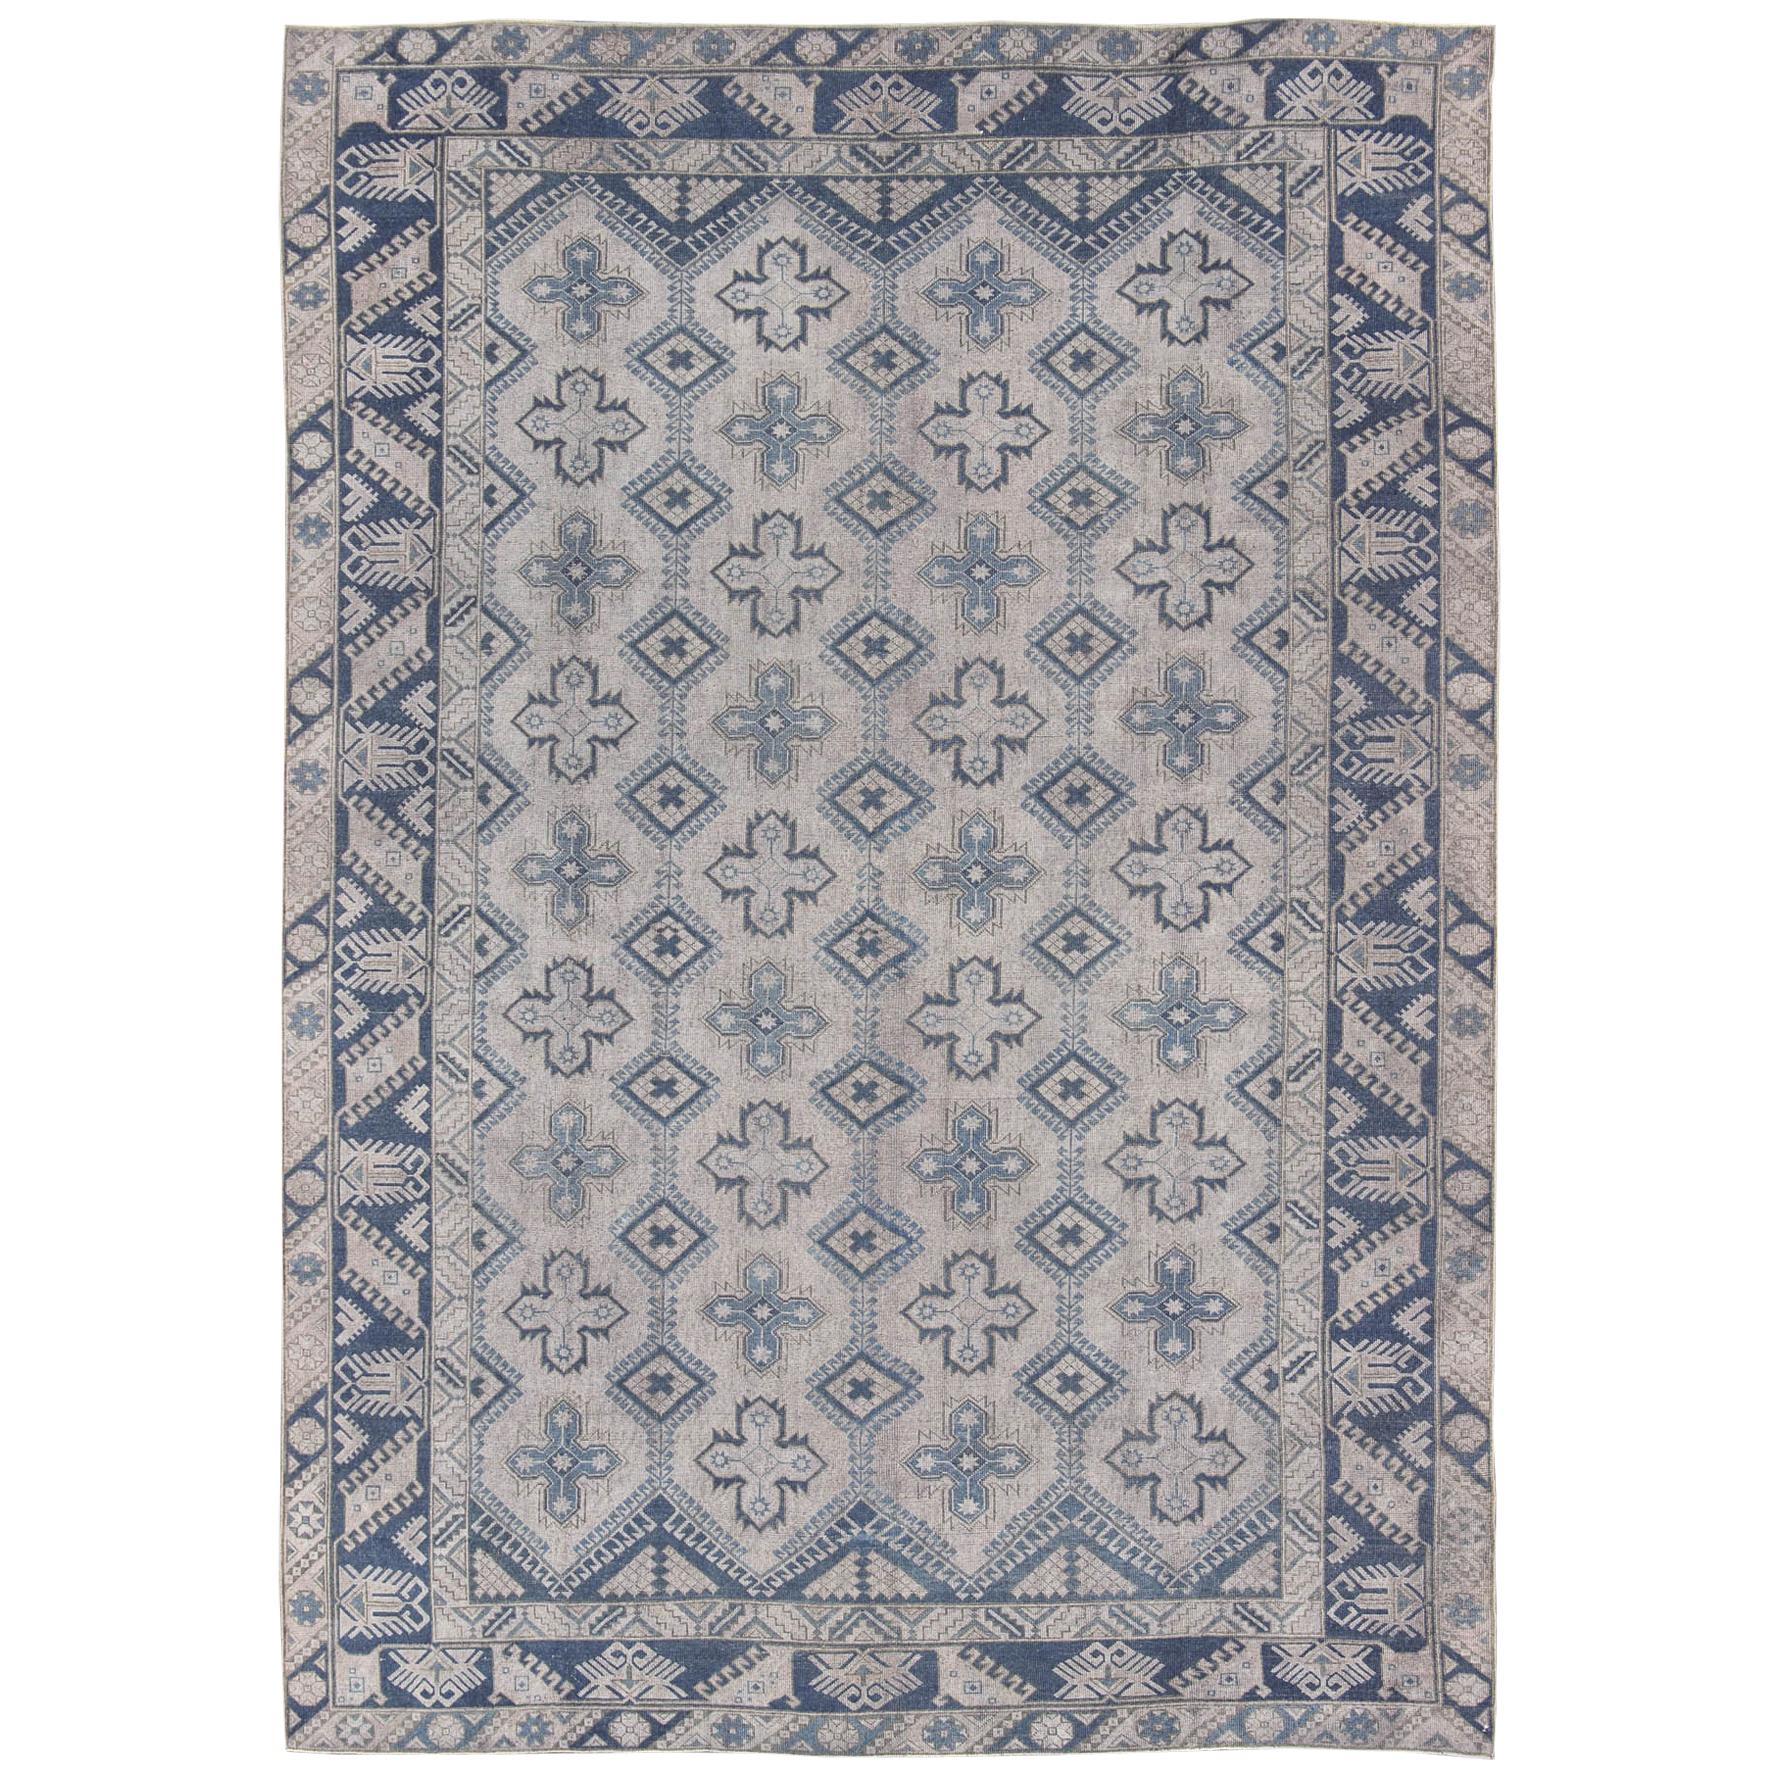 Vintage Turkish Oushak Rug in Blue with All-Over Geometric Design in Gray & Blue For Sale